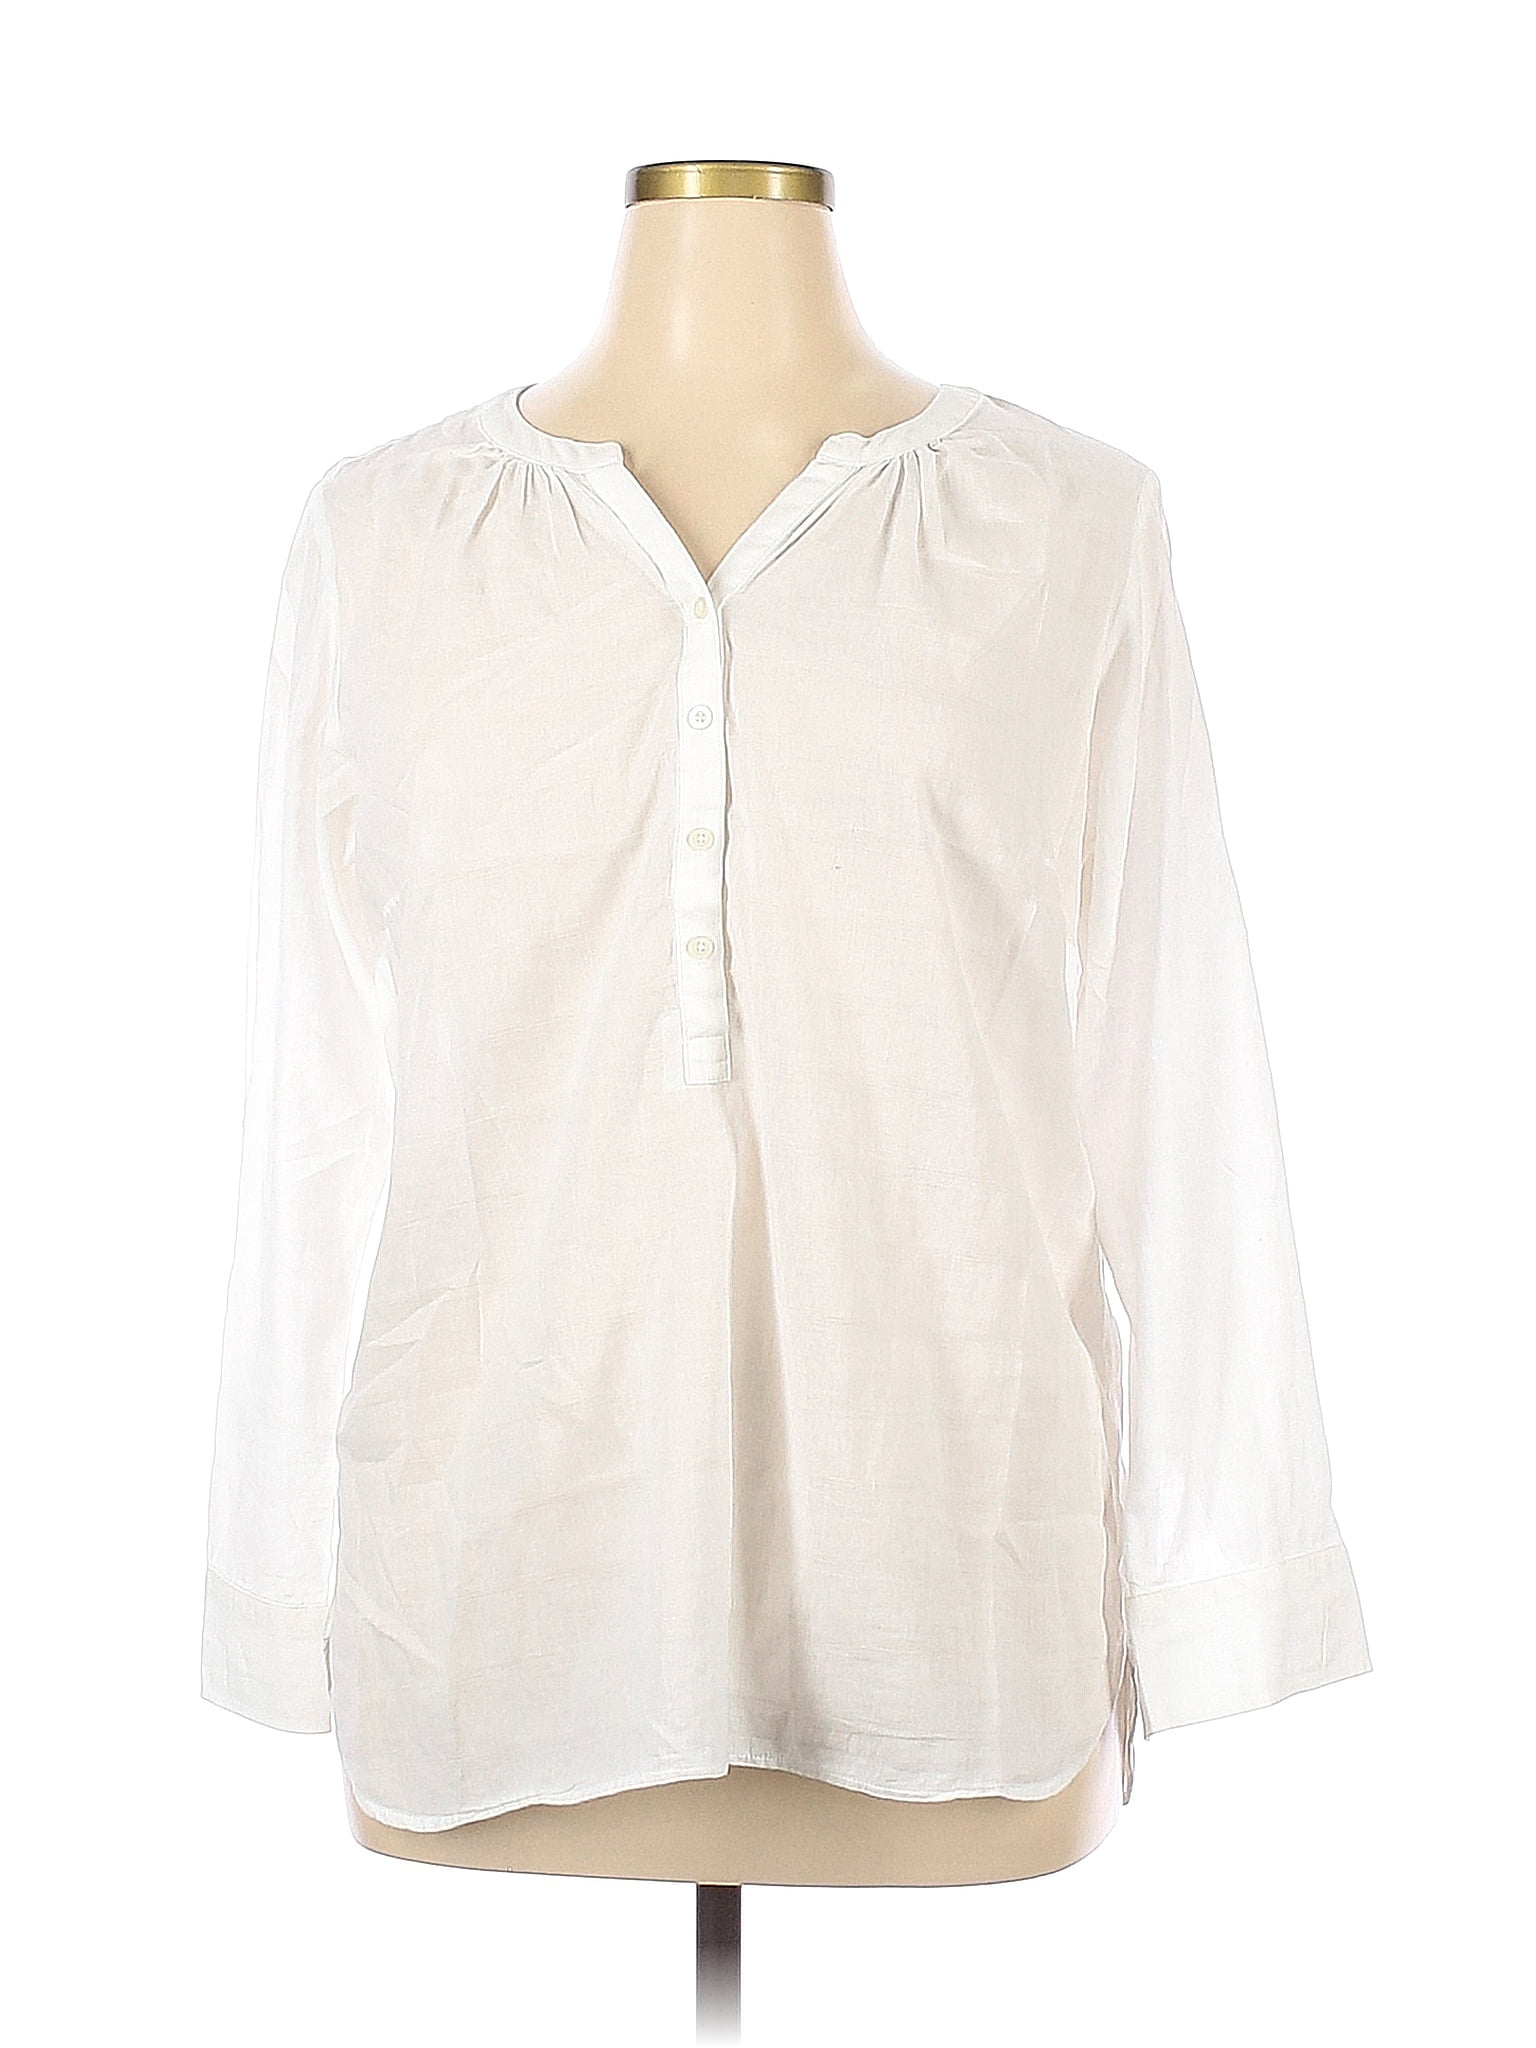 Talbots Outlet 100% Cotton Checkered-gingham White Long Sleeve Blouse ...